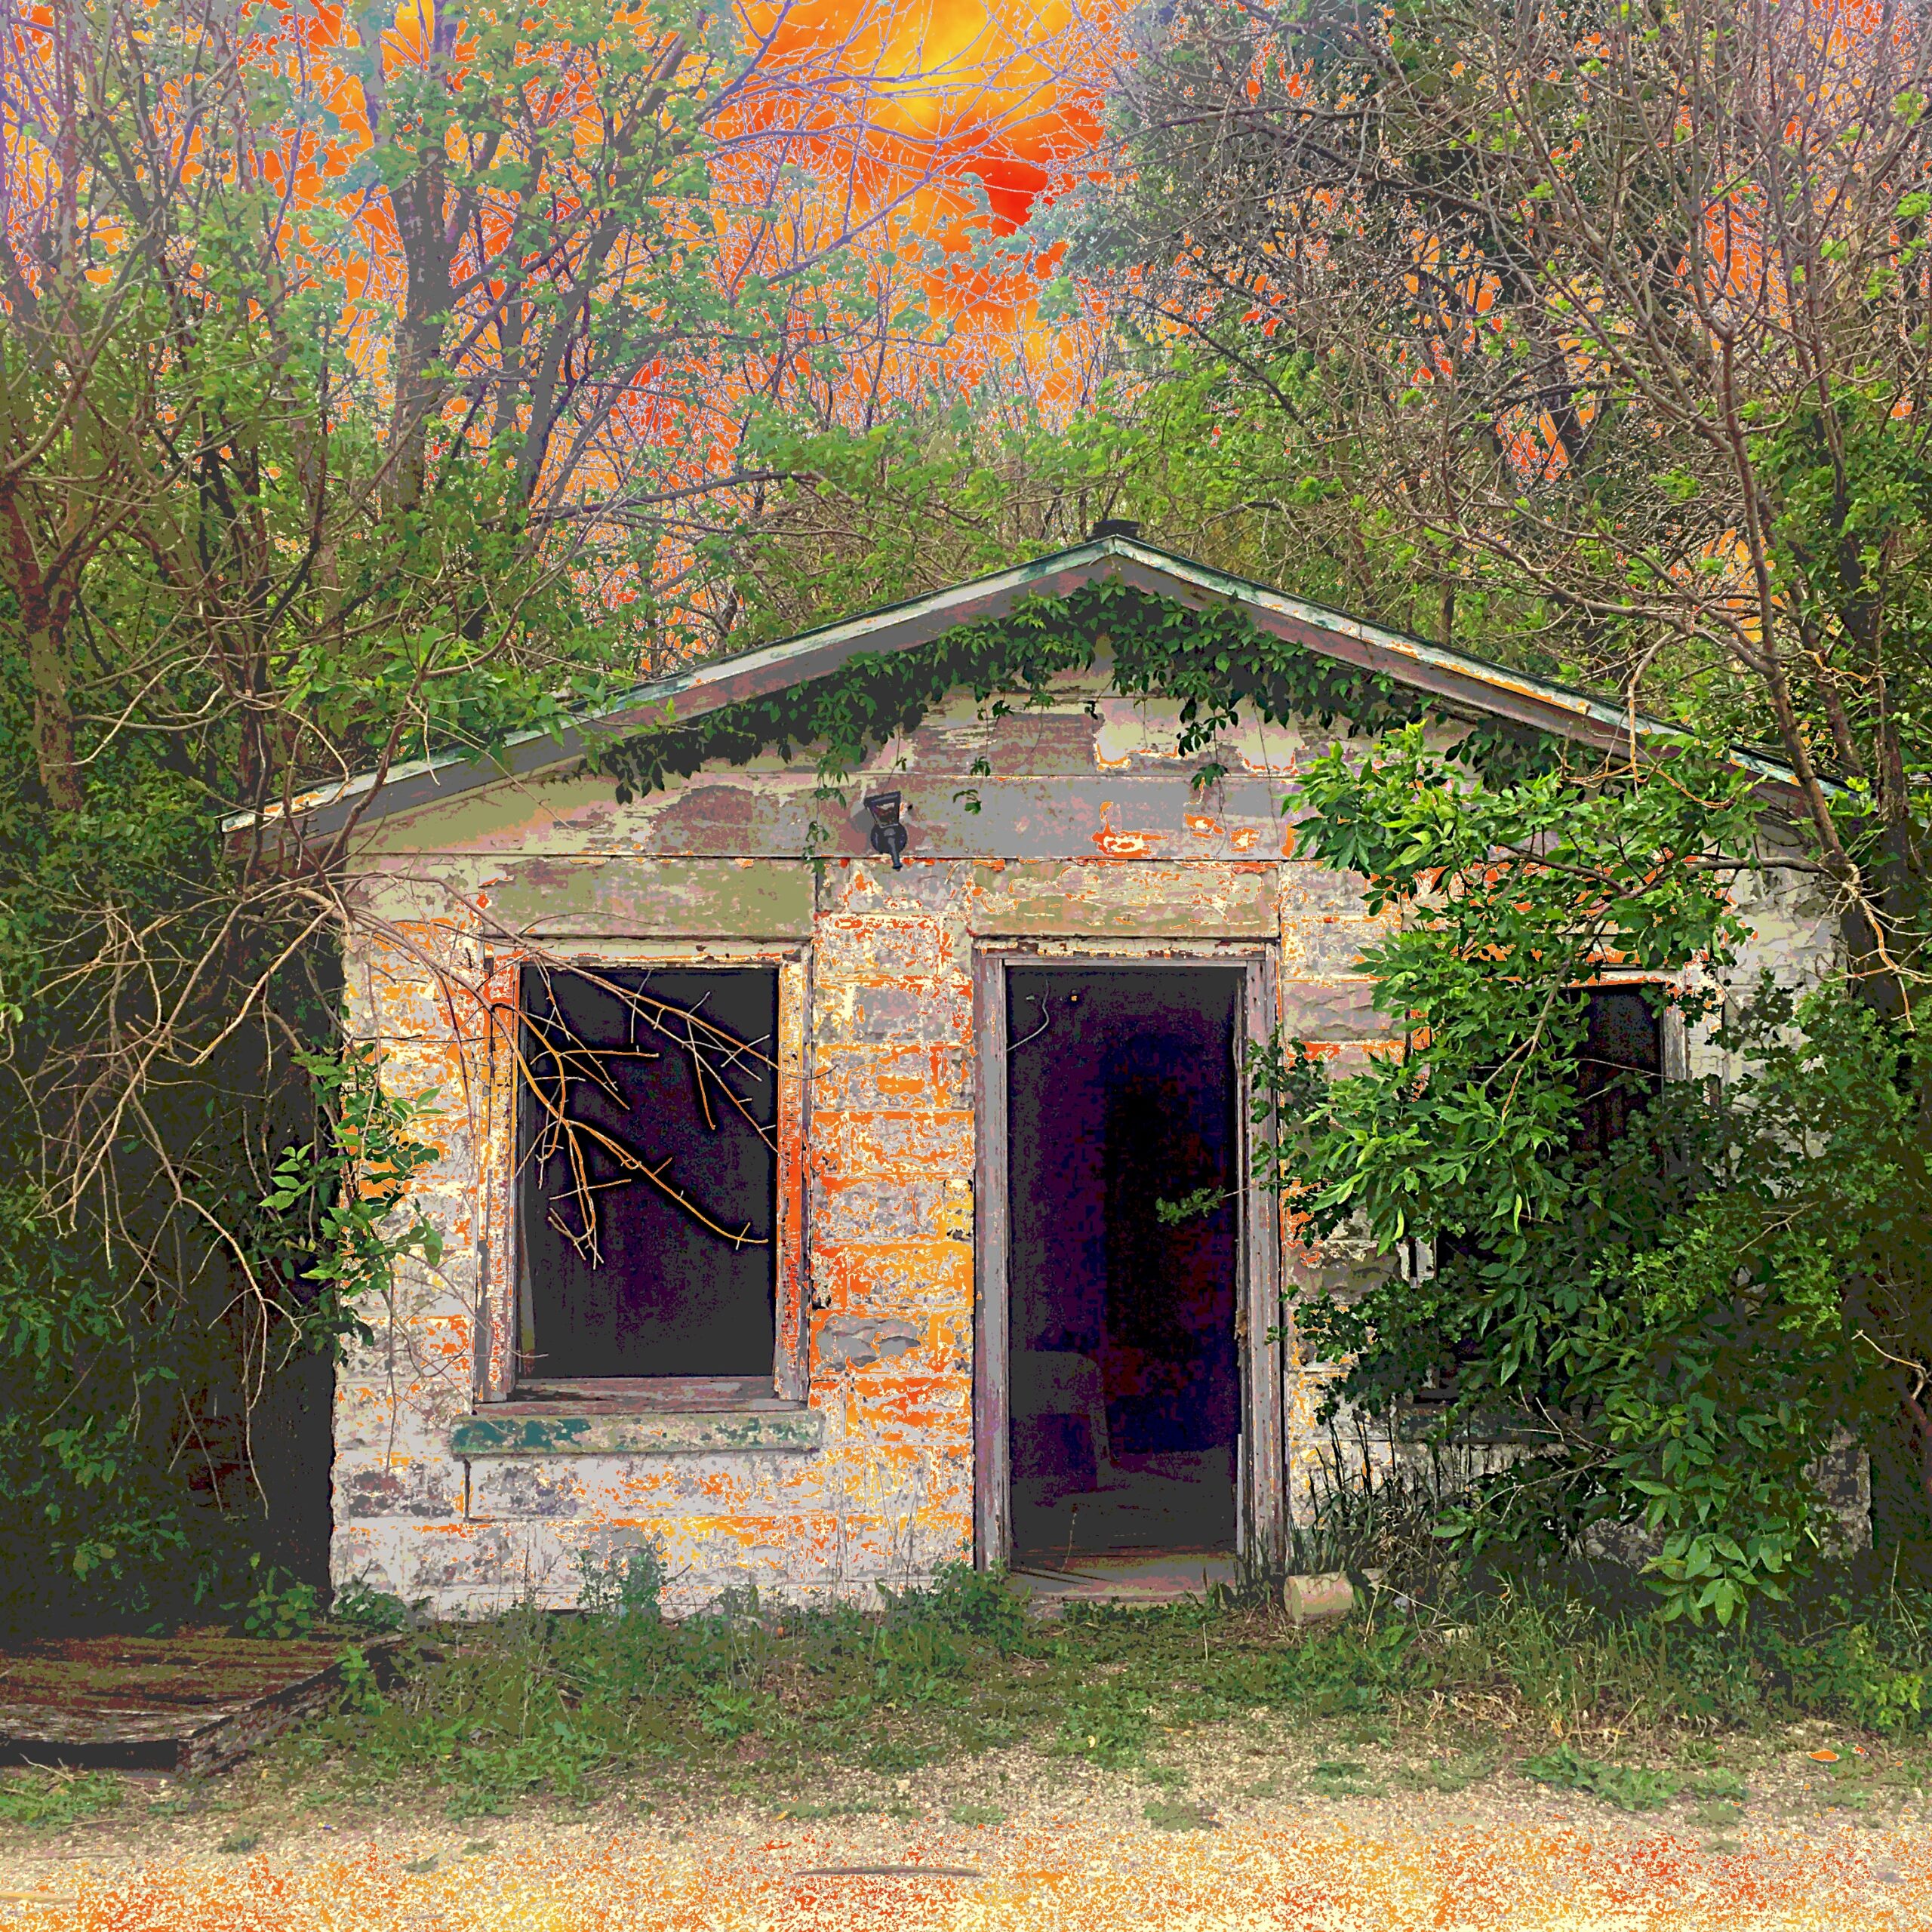 A small dilapidated building. The door is gone and so are the windows. It is very dark inside. Growing around it is the green of spring. The sky in the background is an angry red.